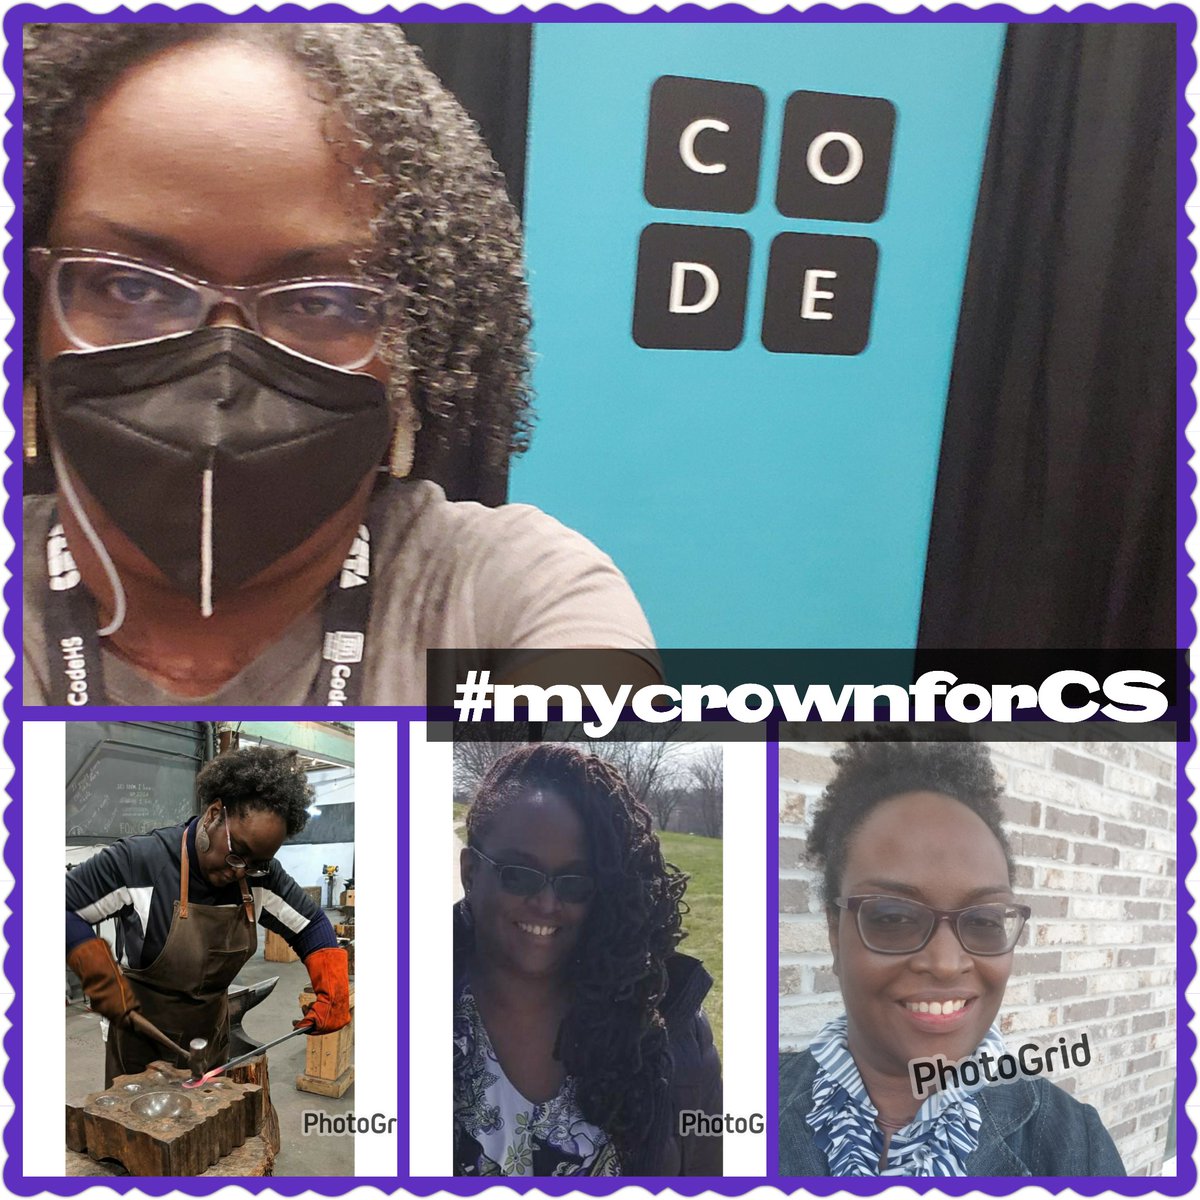 20 years of natural hairstyles - afropuffs, locs, TWAs and more as I  moved from teaching CS to supporting CS educators. #mycrownforCS